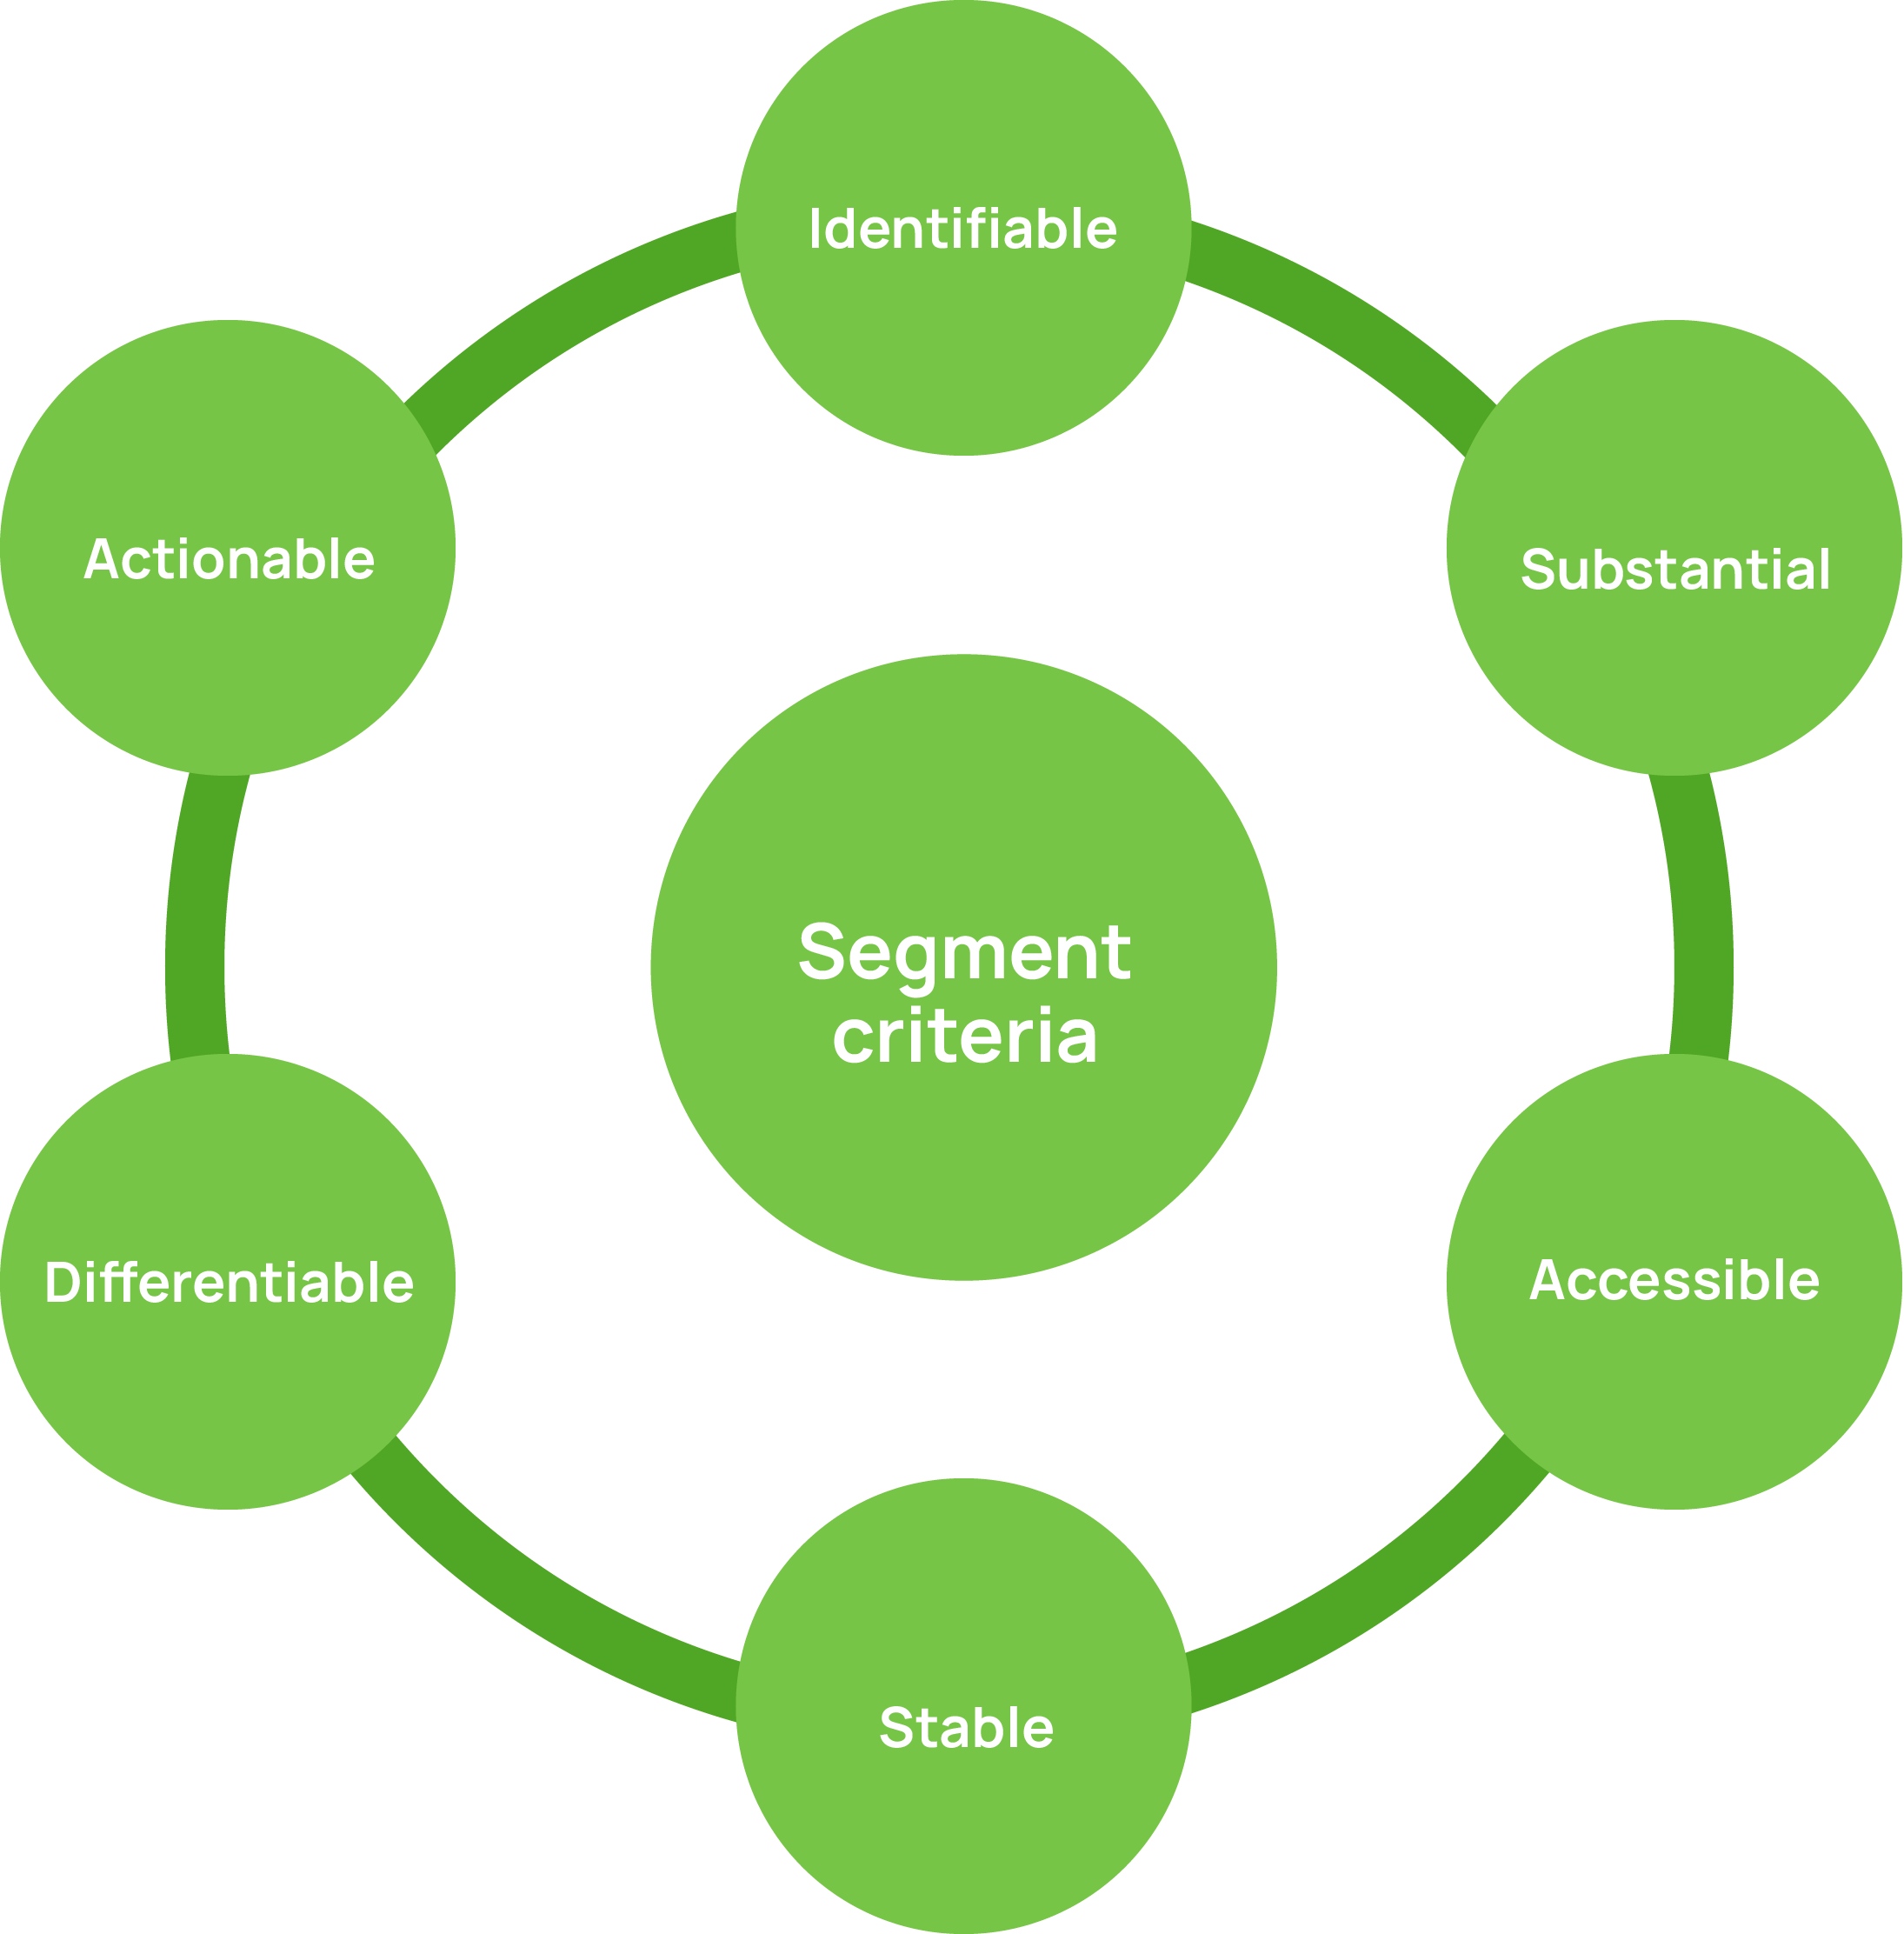 Segment criteria for customer segmentation: Identifiable, Substantial, Accessible, Stable, Differentiable, Actionable